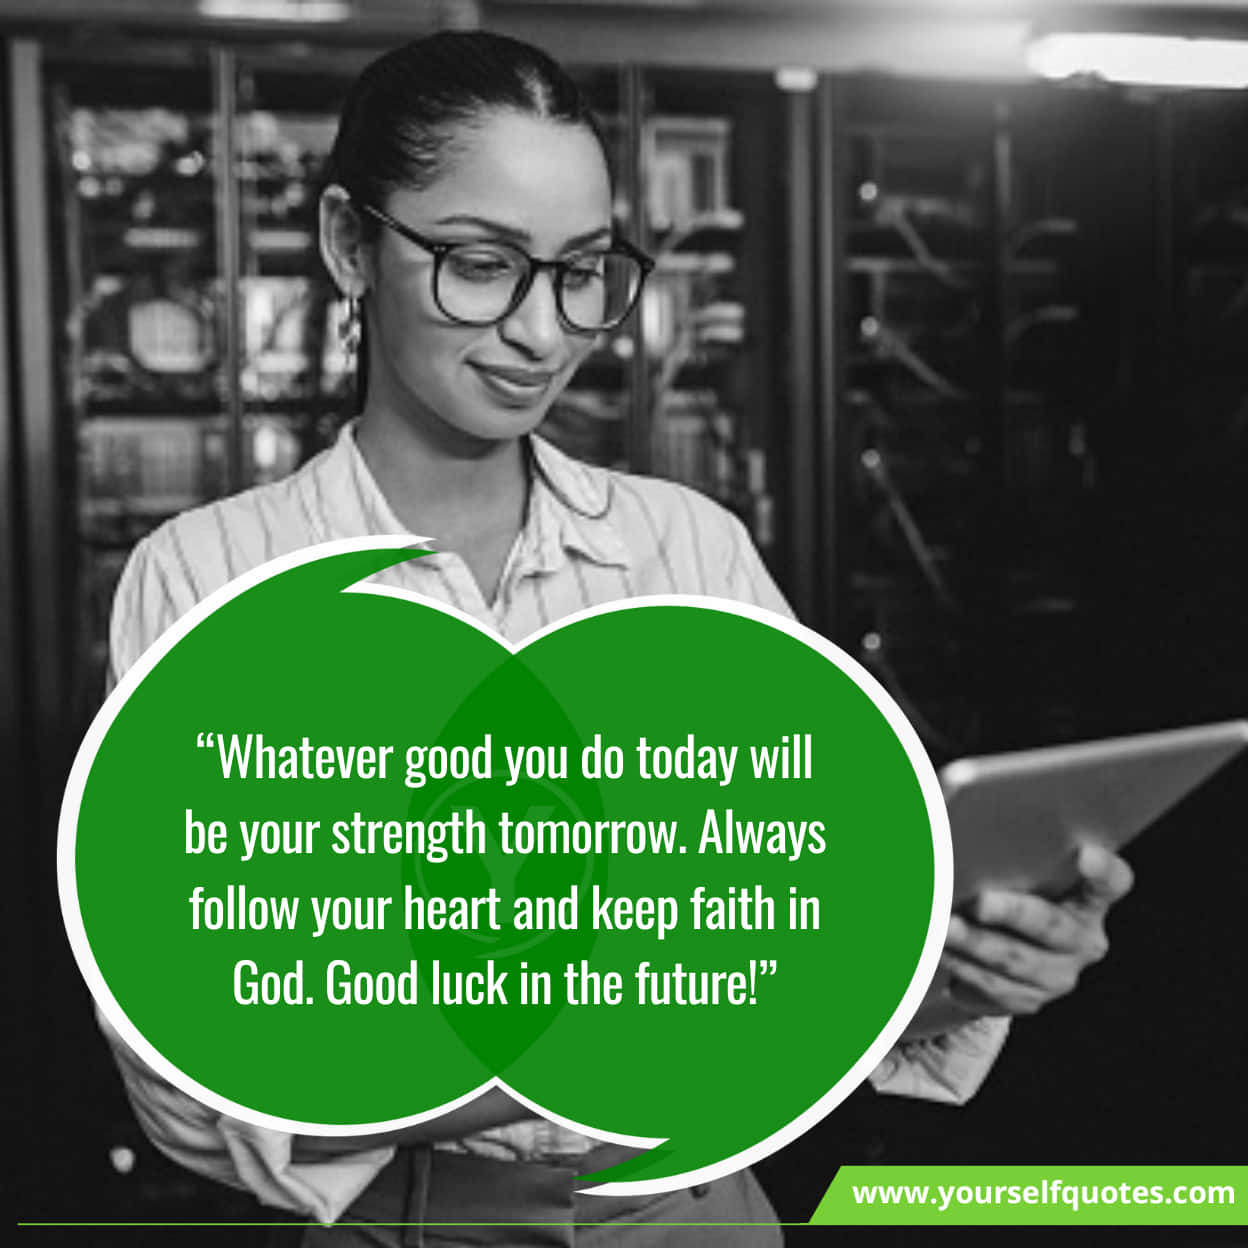 Best Good Luck Quotes, Wishes & Messages